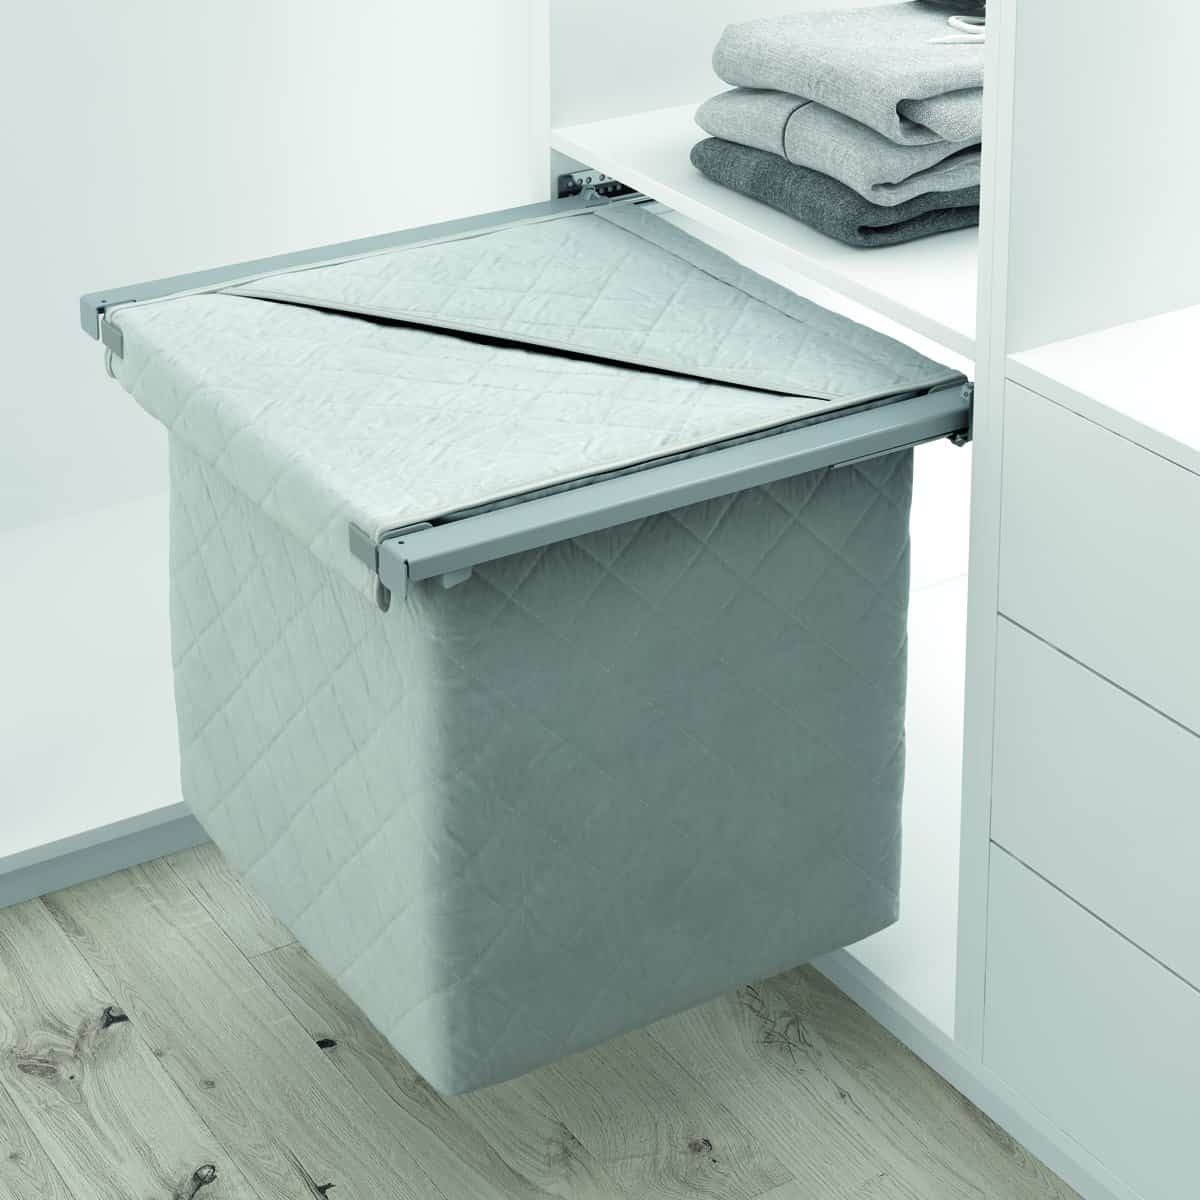 Menage Confort’s Pull-out laundry basket by Jyoti Architectural Products